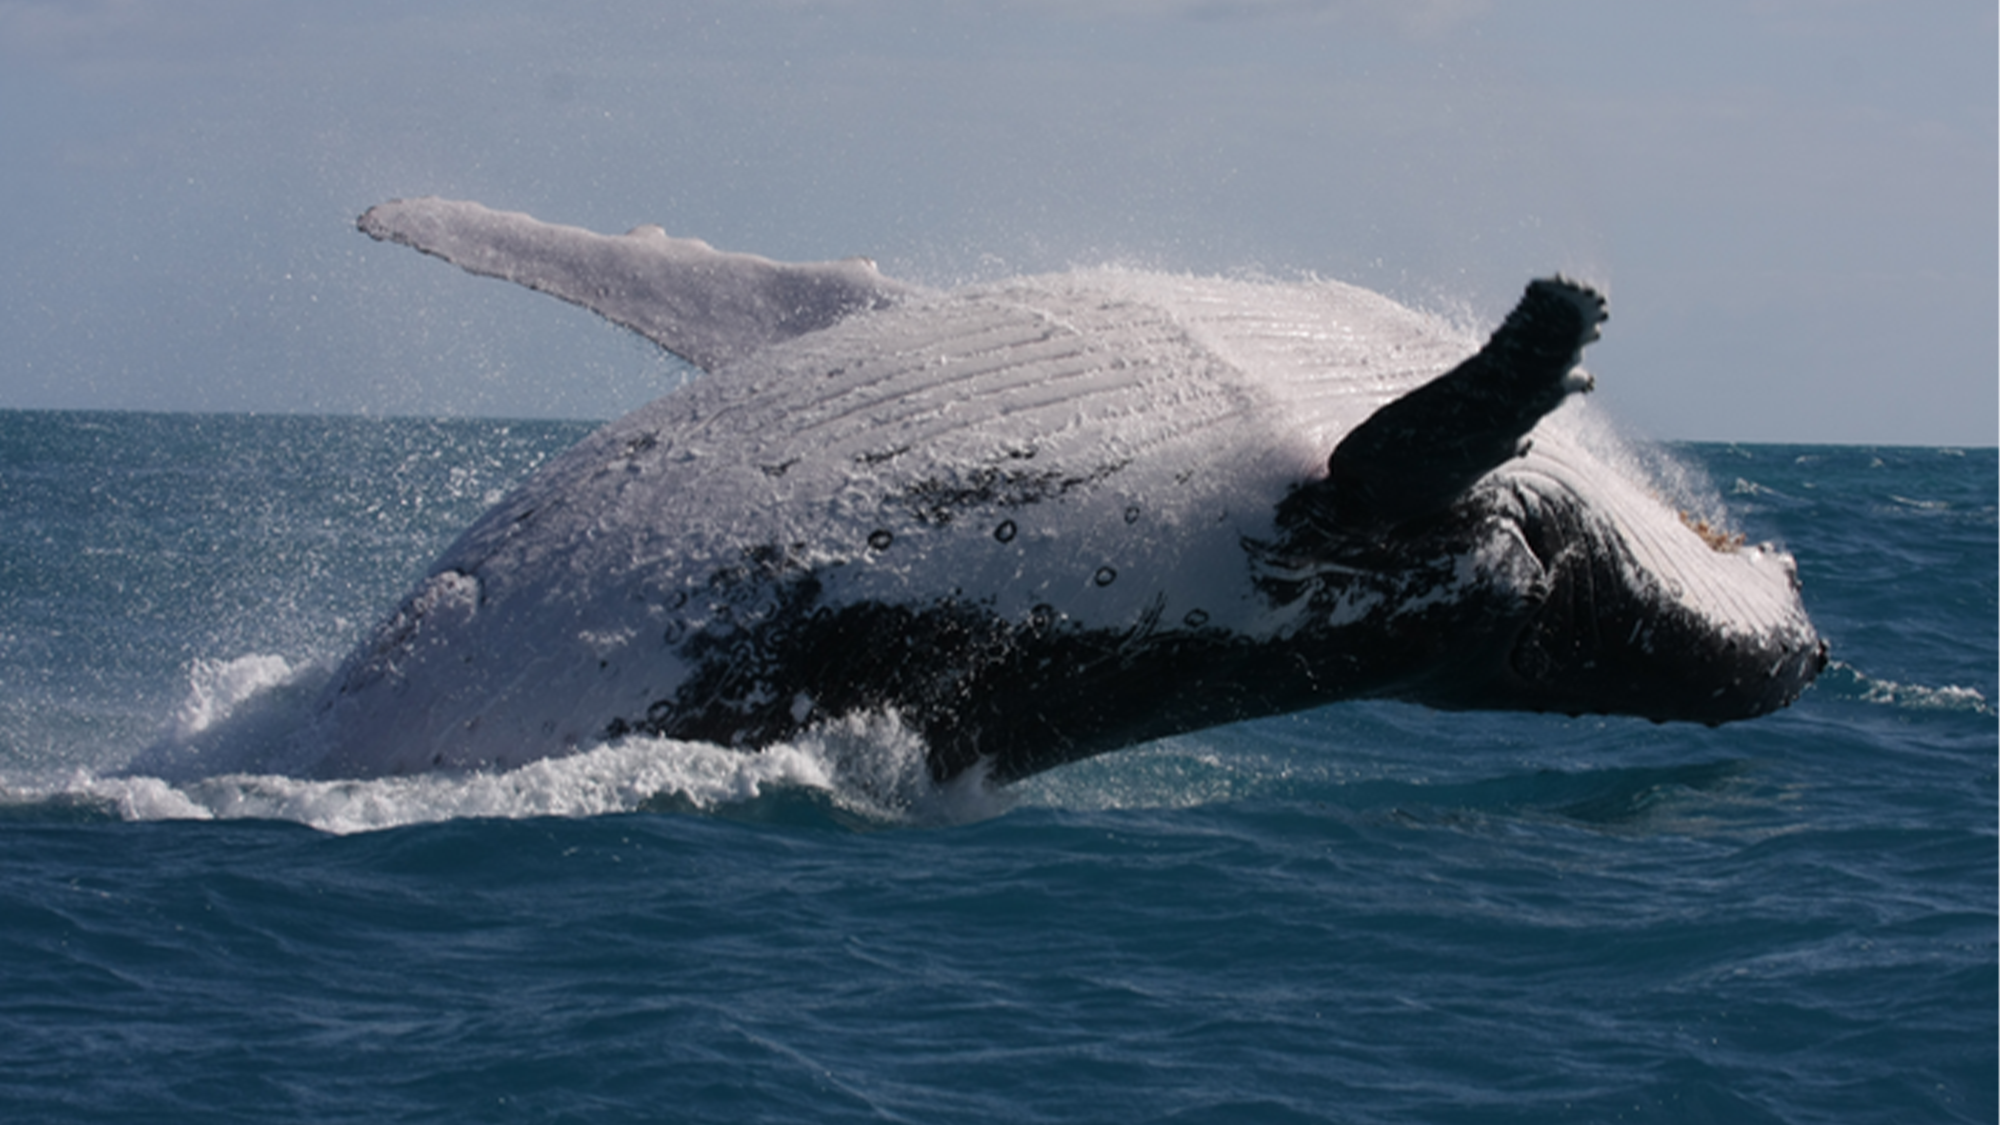 An adult humpback whale surfaces above the water in eastern Australia.